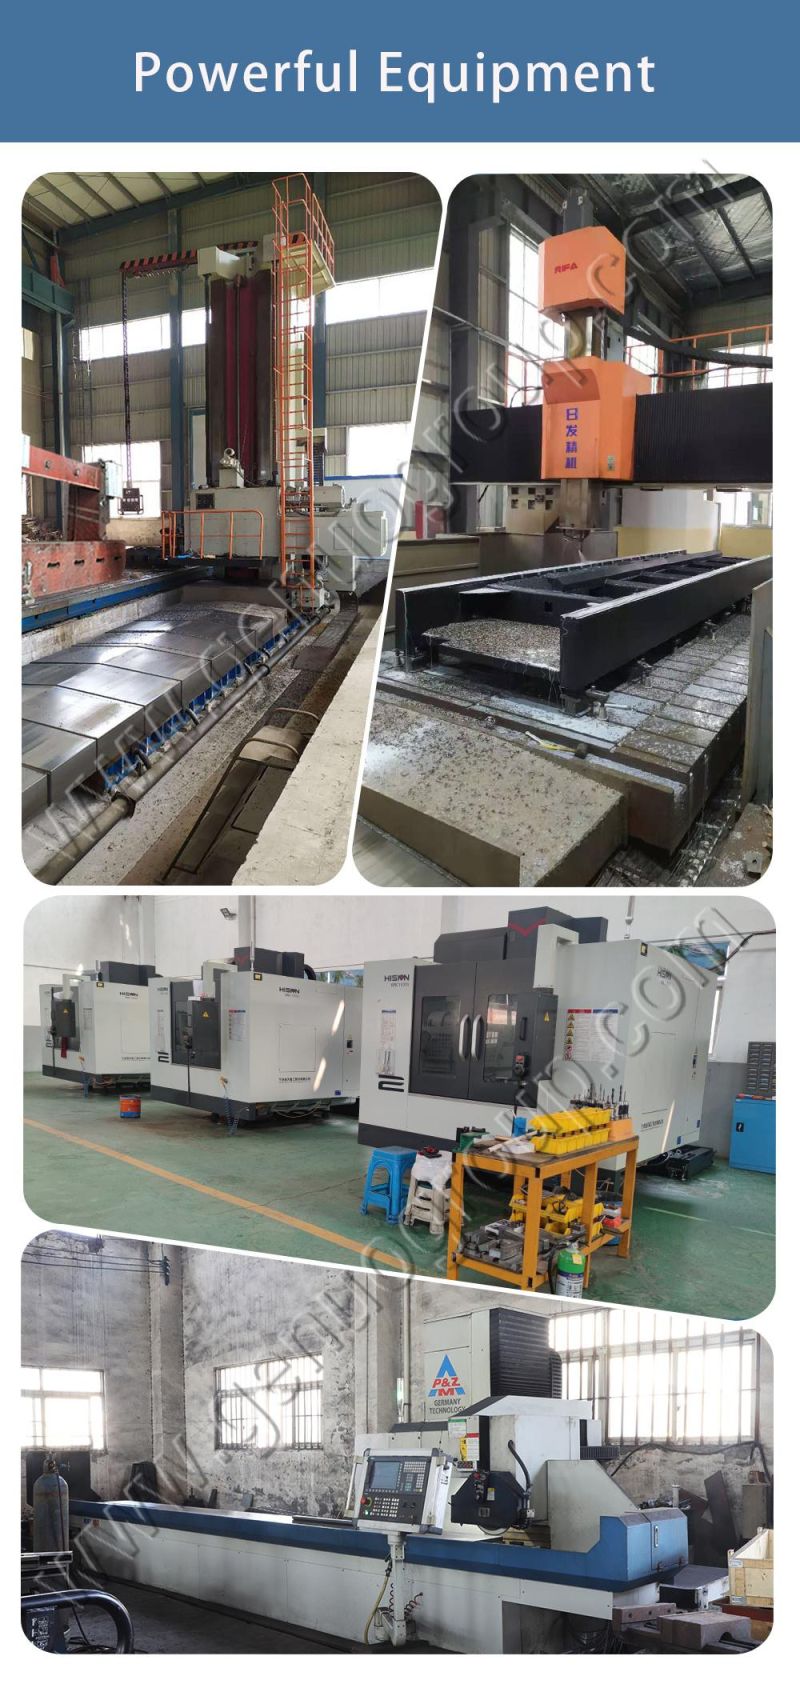 Gn 4015 LC 2000W Single Table Laser Cutting Machine